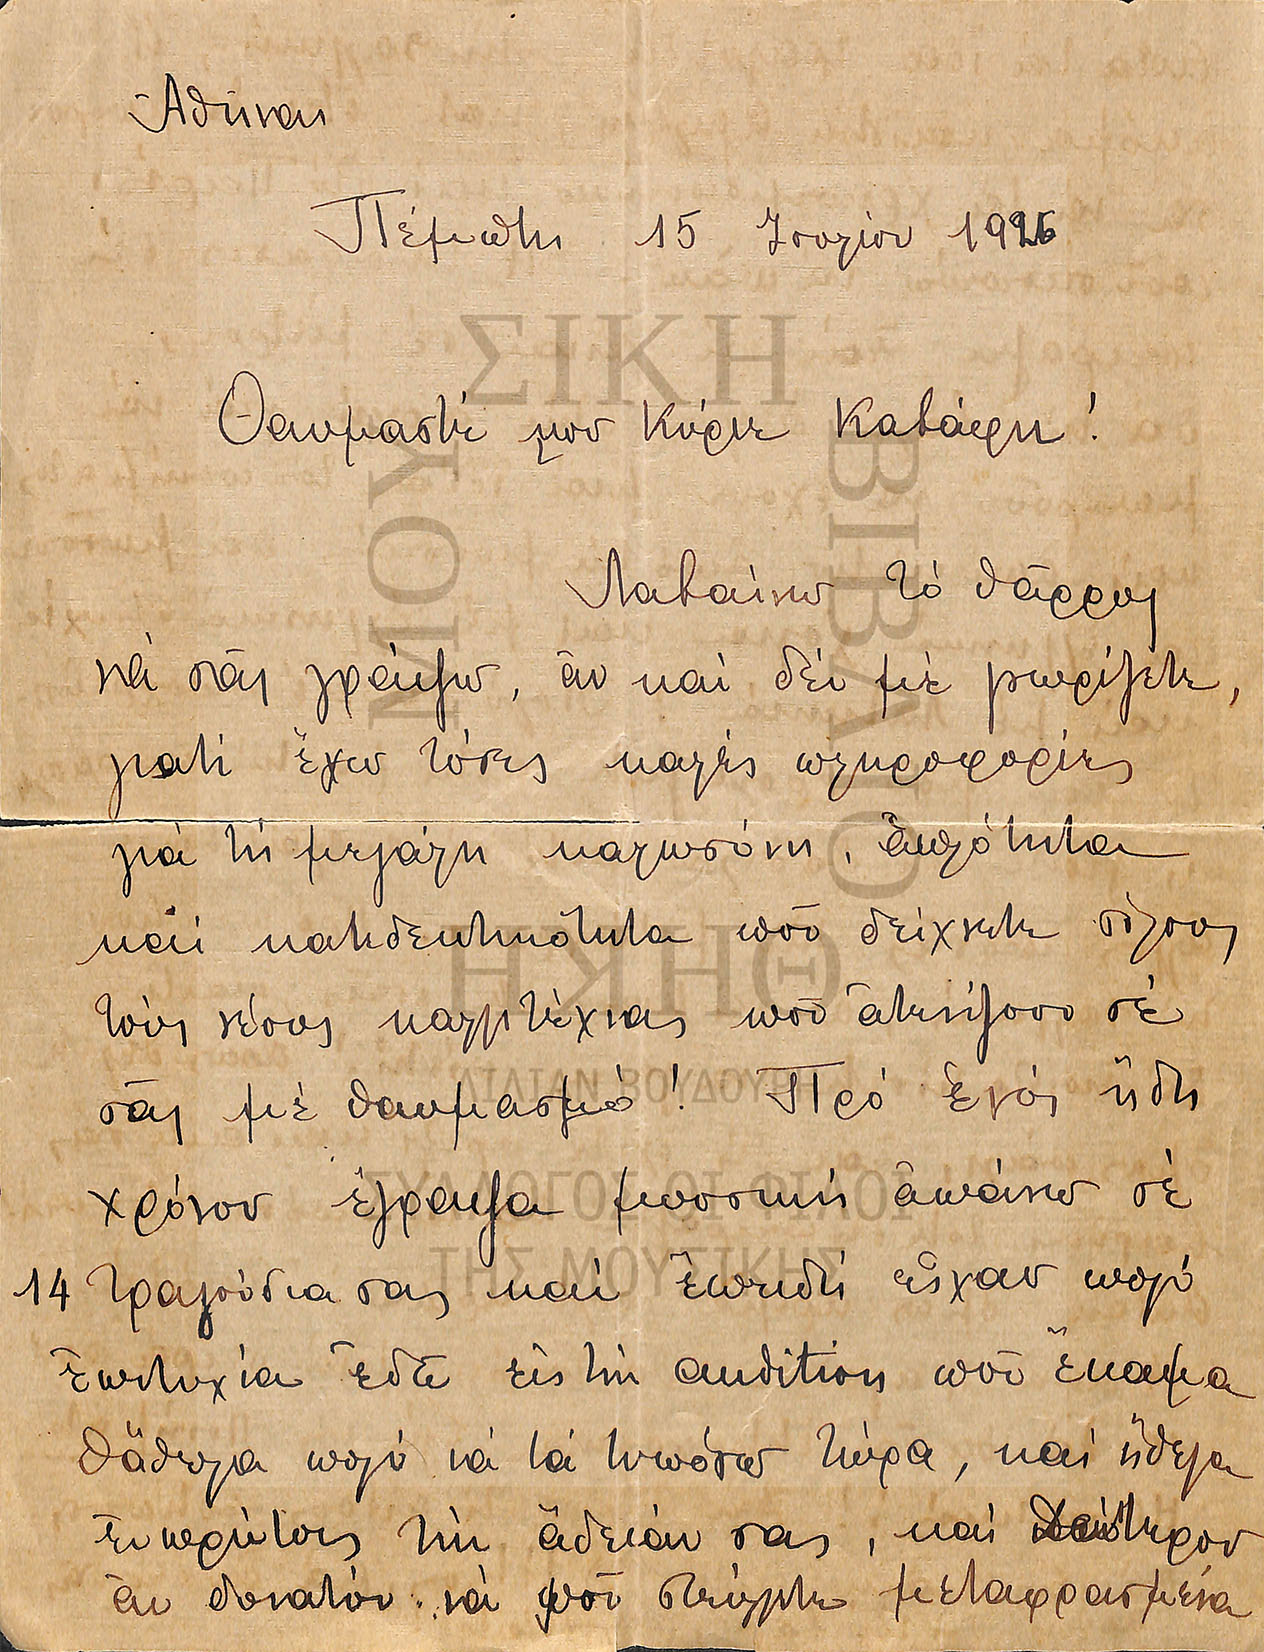 Two (digitally reproduced) handwritten letters by Dimitri Mitropoulos to Cavafy, sent from Athens. In the first letter (15/7/